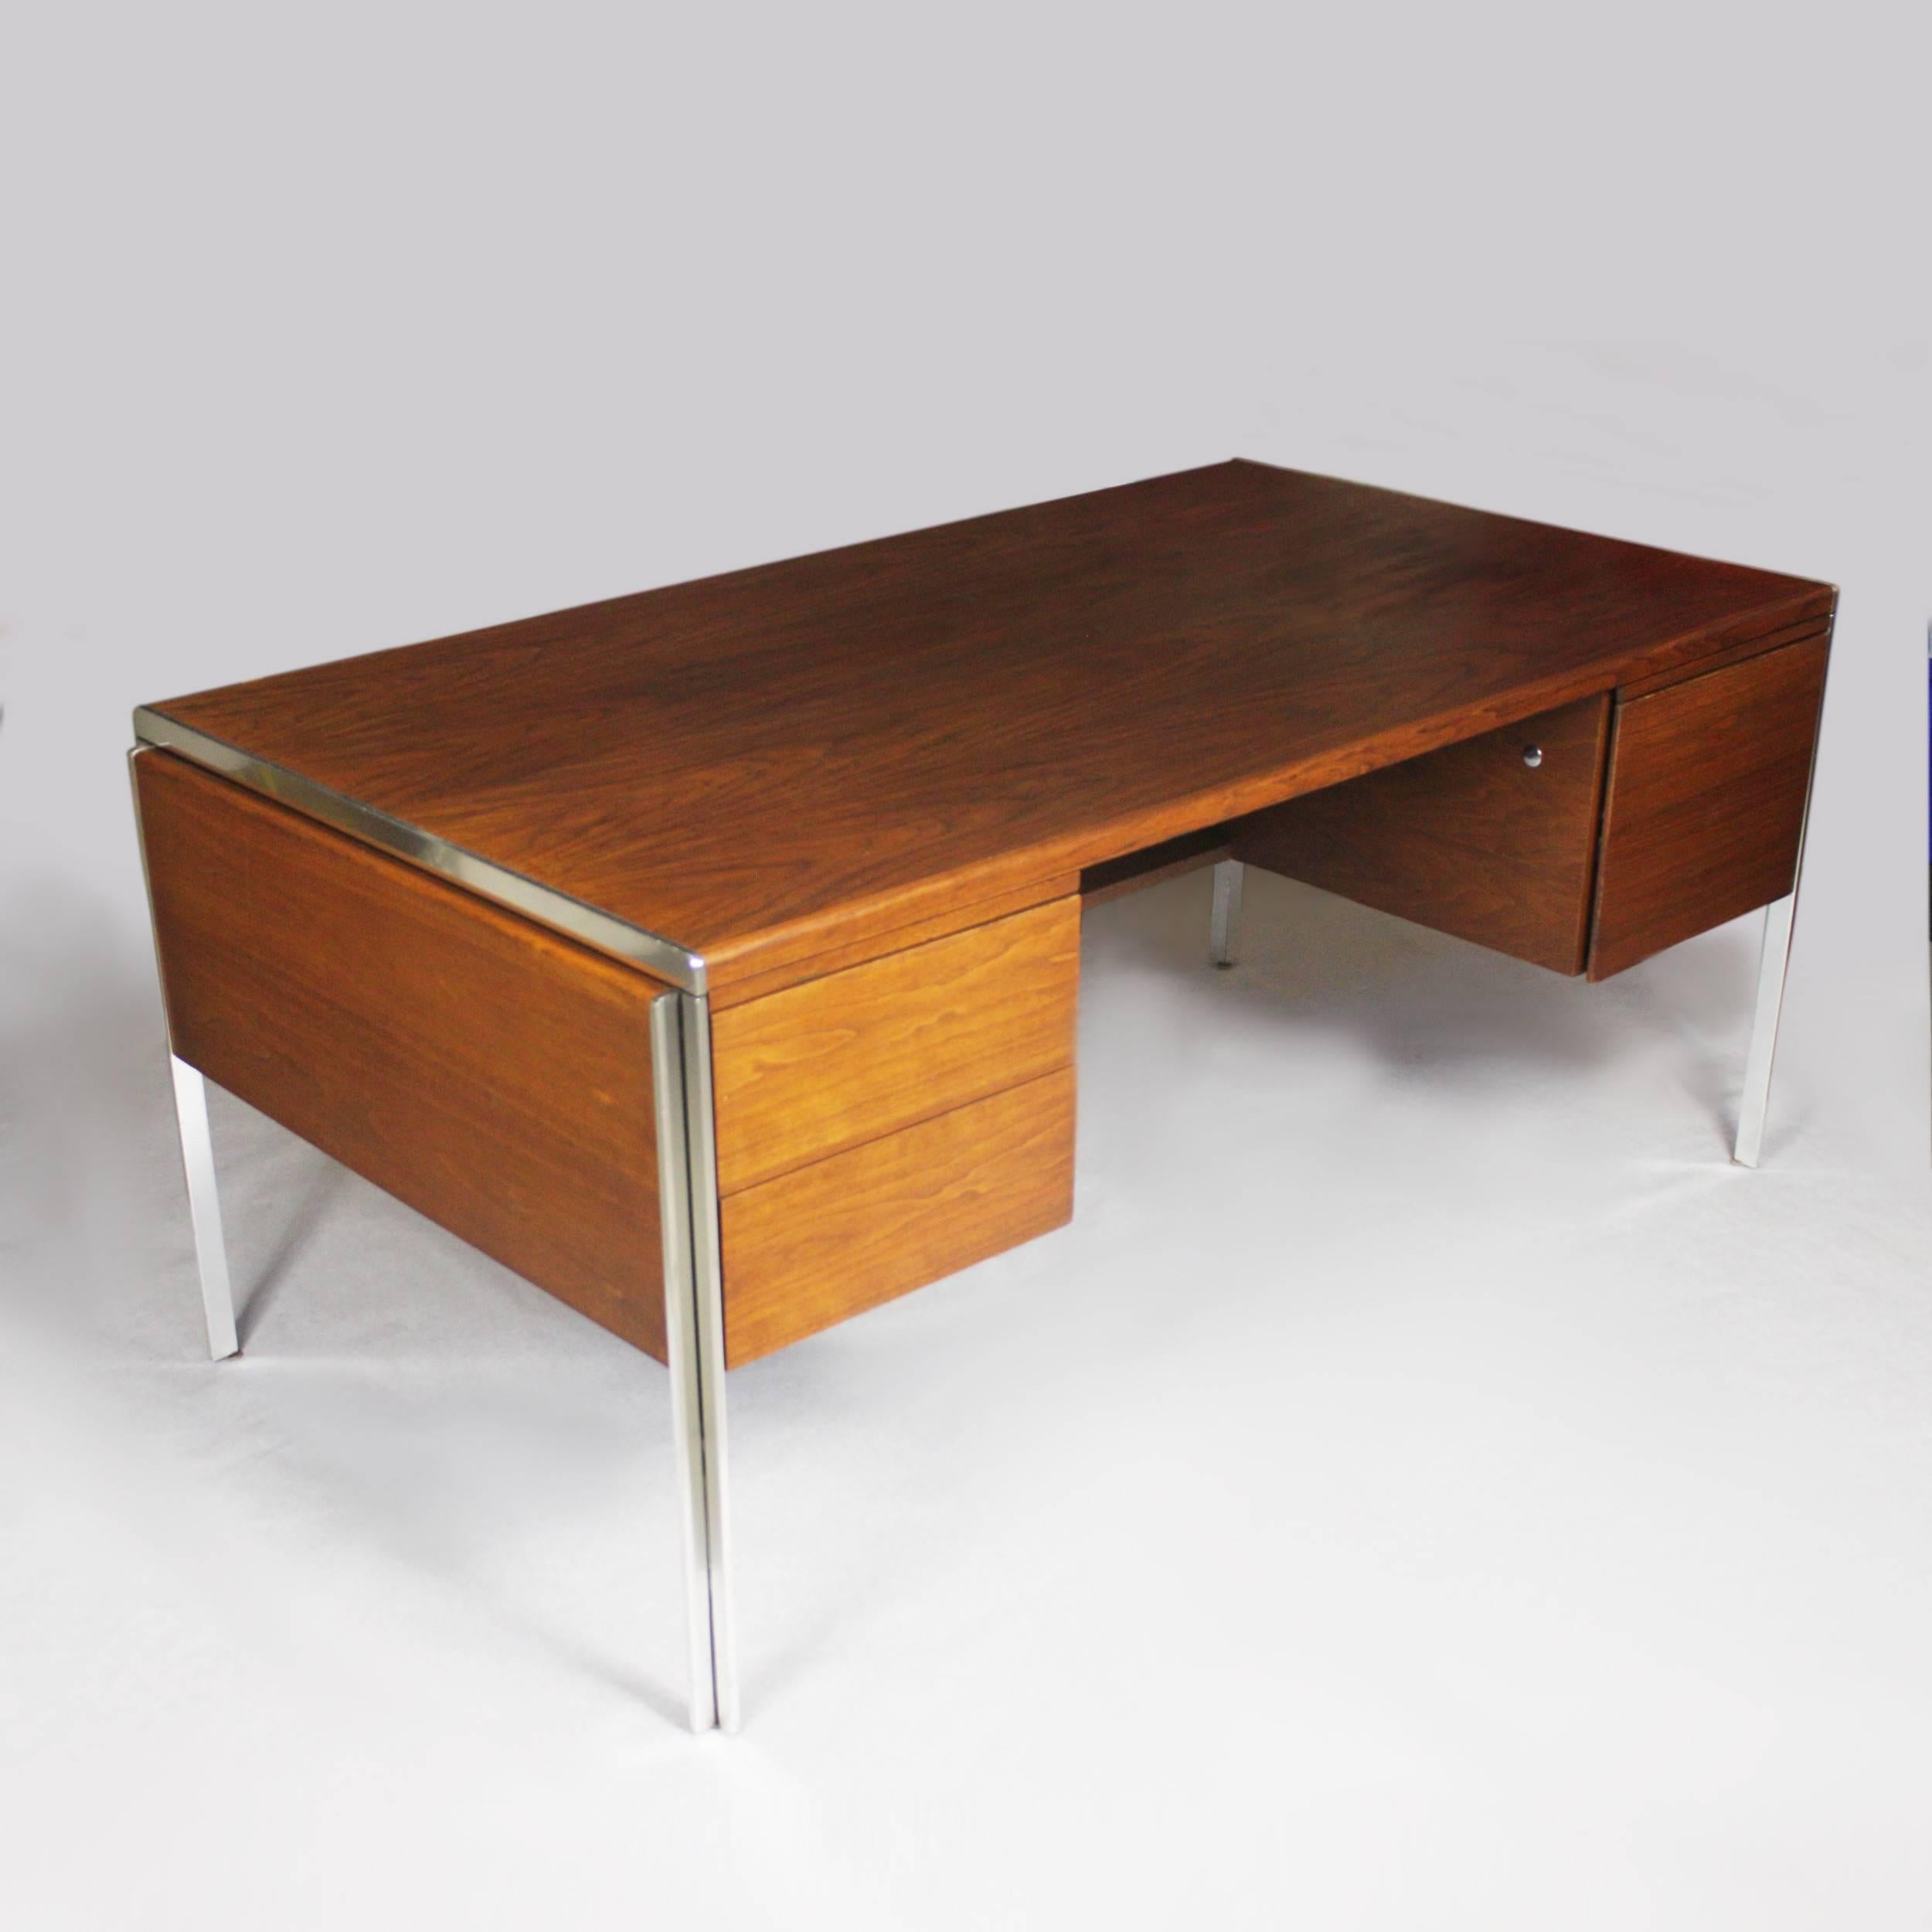 This wonderful Mid-Century Modern desk by Stow Davis has everything going for it. With its beautifully clean lines and touch of polished aluminium accents, this desk is the epitome of 1970s chic. Whether you use it in your home or office, this